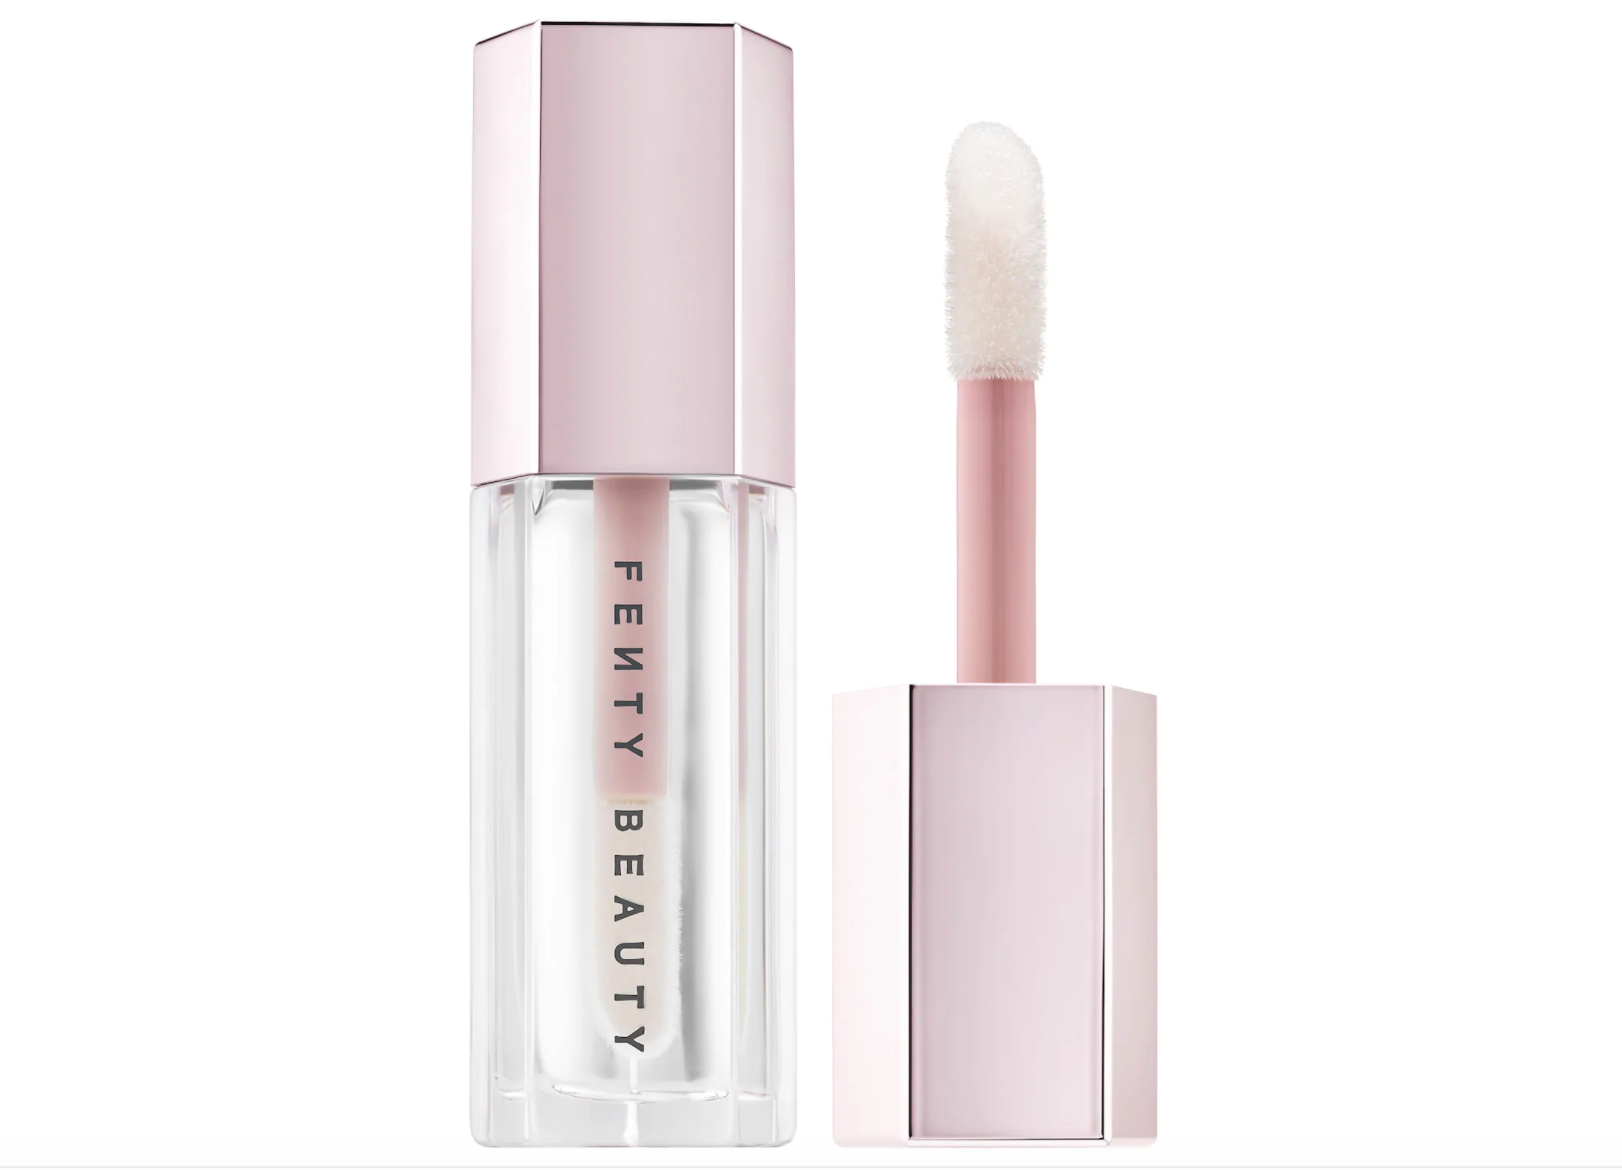 The 10 Best Clear Lip Glosses of All Time - Moisturizing Sheer Lip Gloss